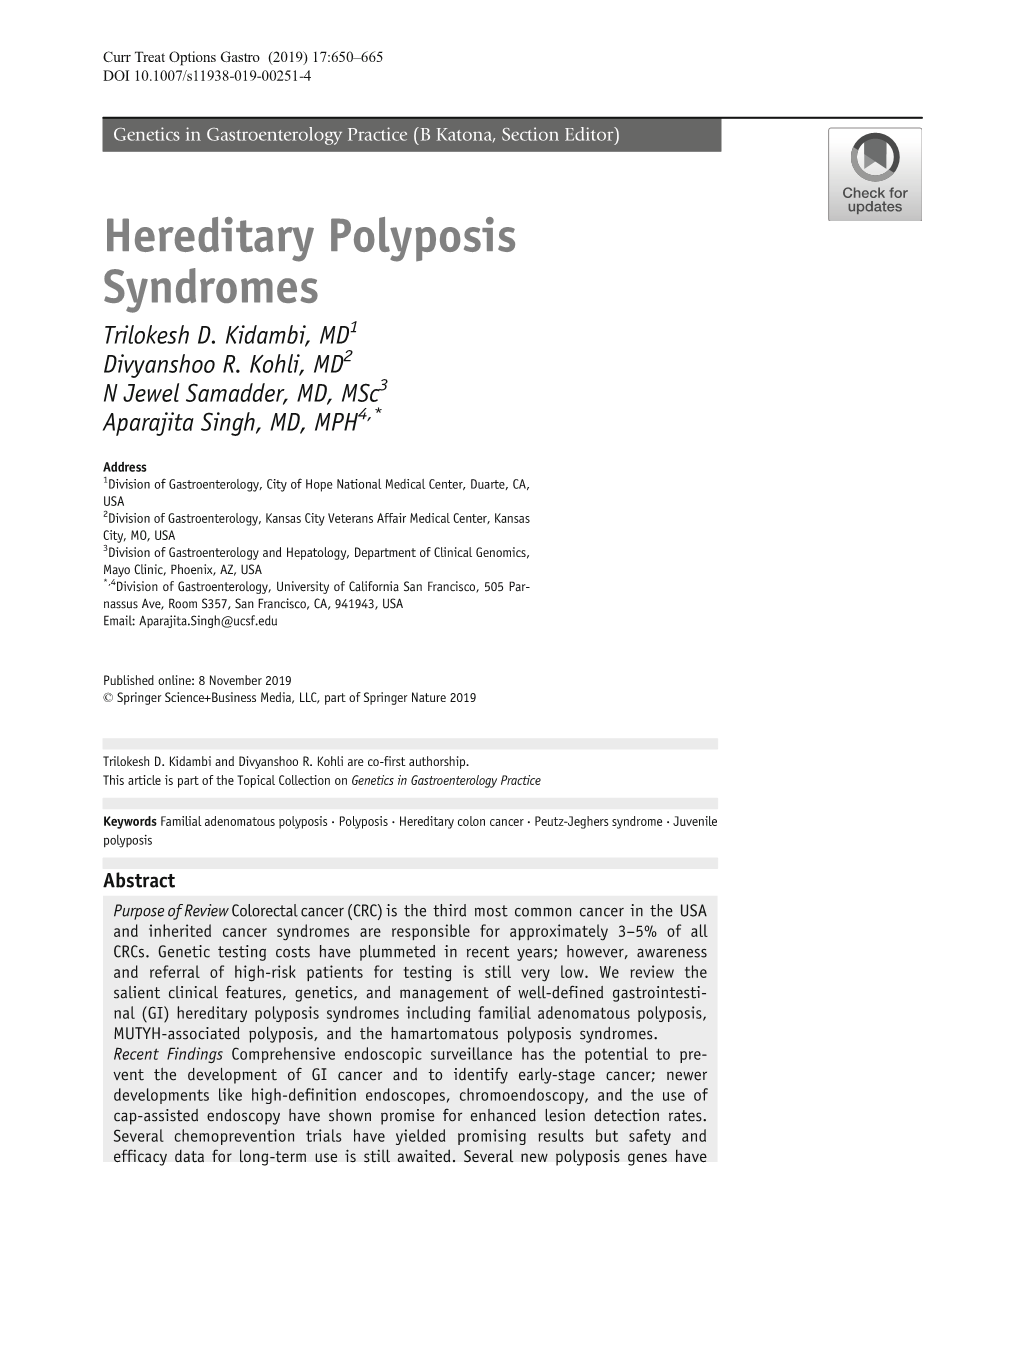 Hereditary Polyposis Syndromes Trilokesh D